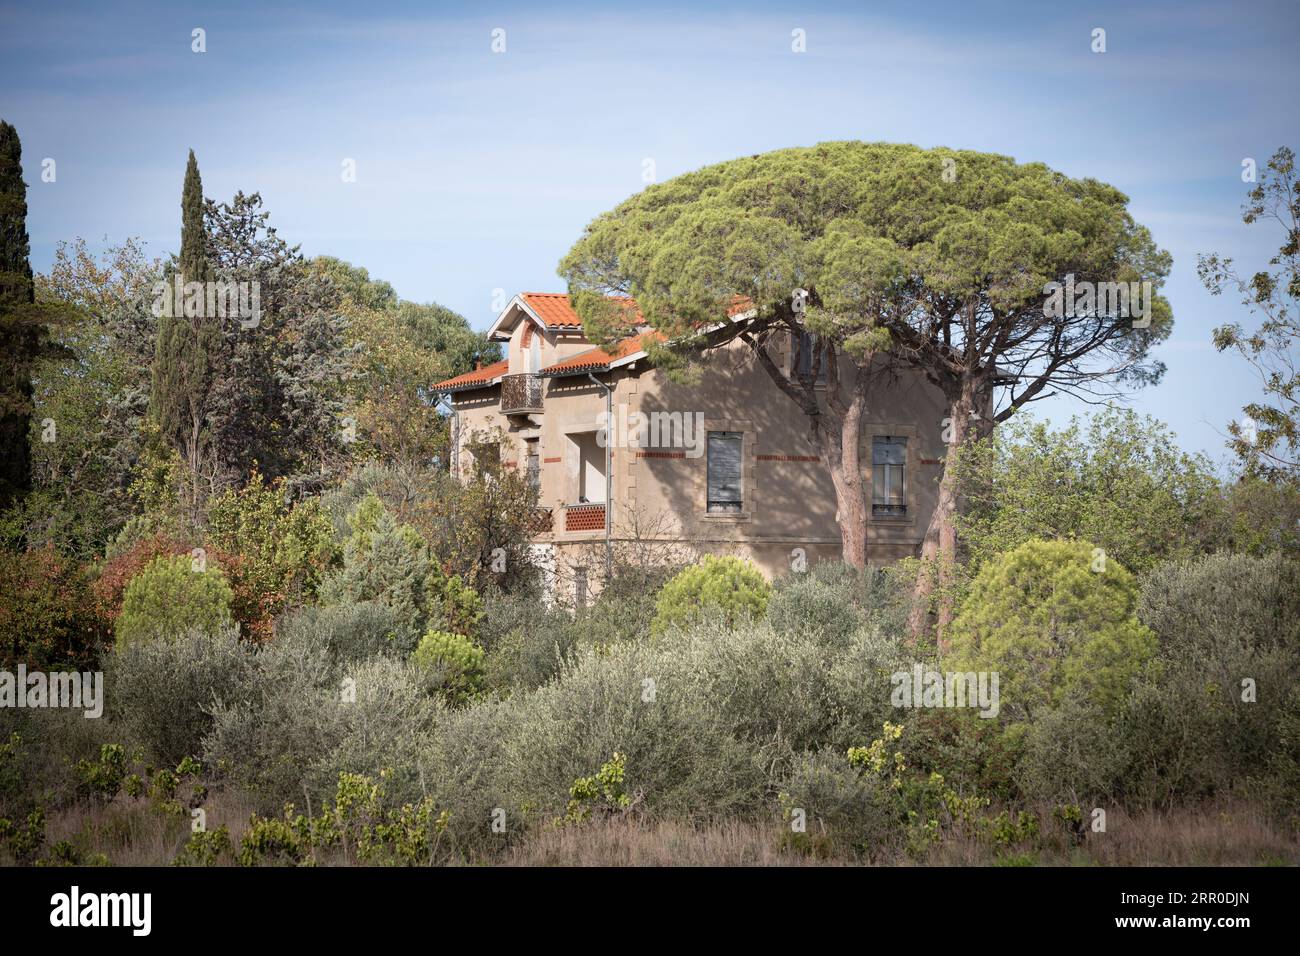 A deserted, empty, abandoned house in woodland in the South of France Stock Photo